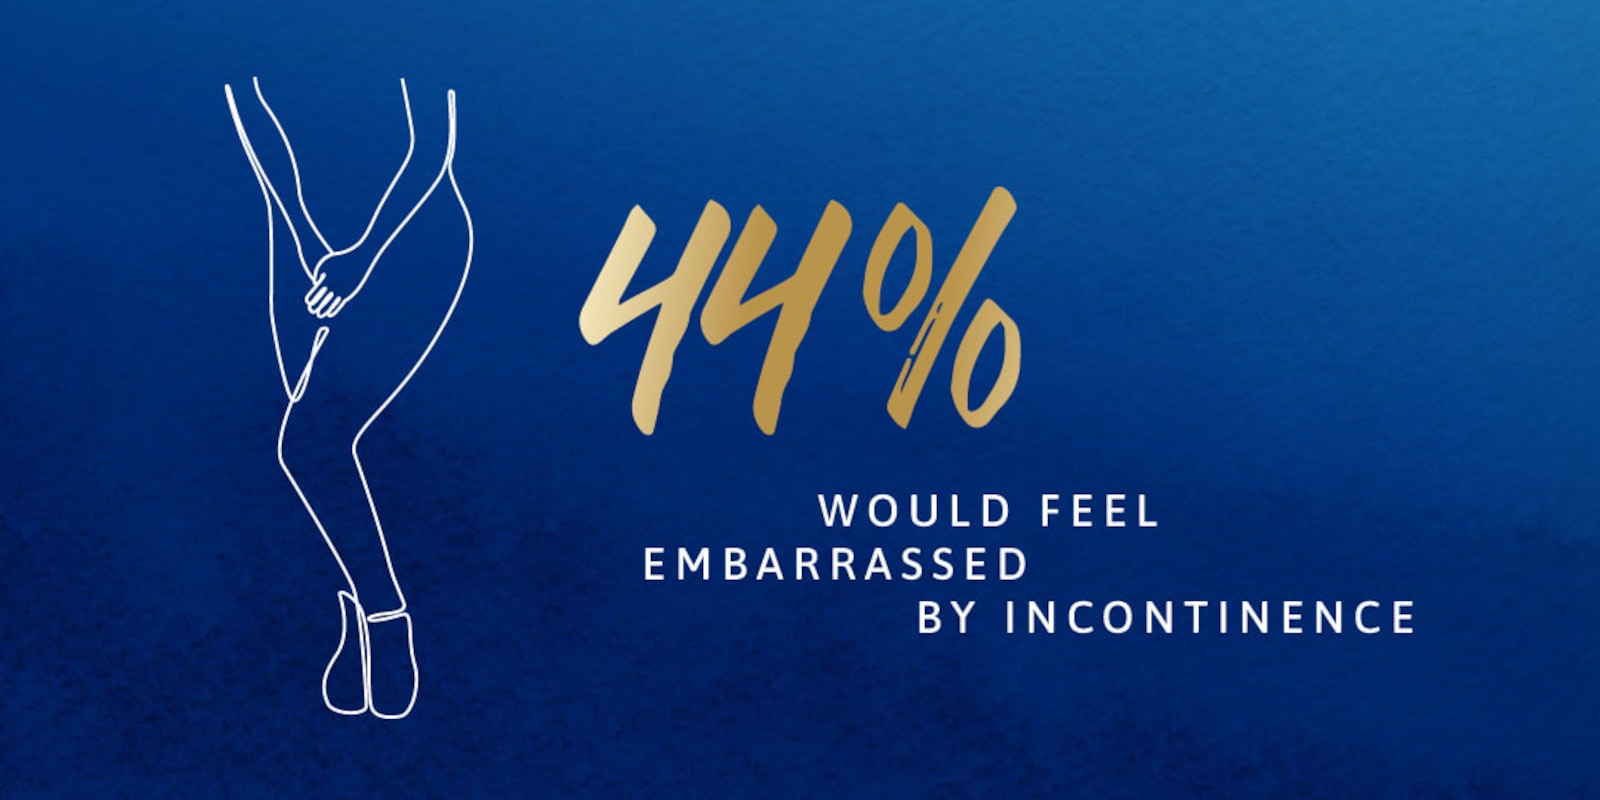 44% would feel embarrassed by incontinence 